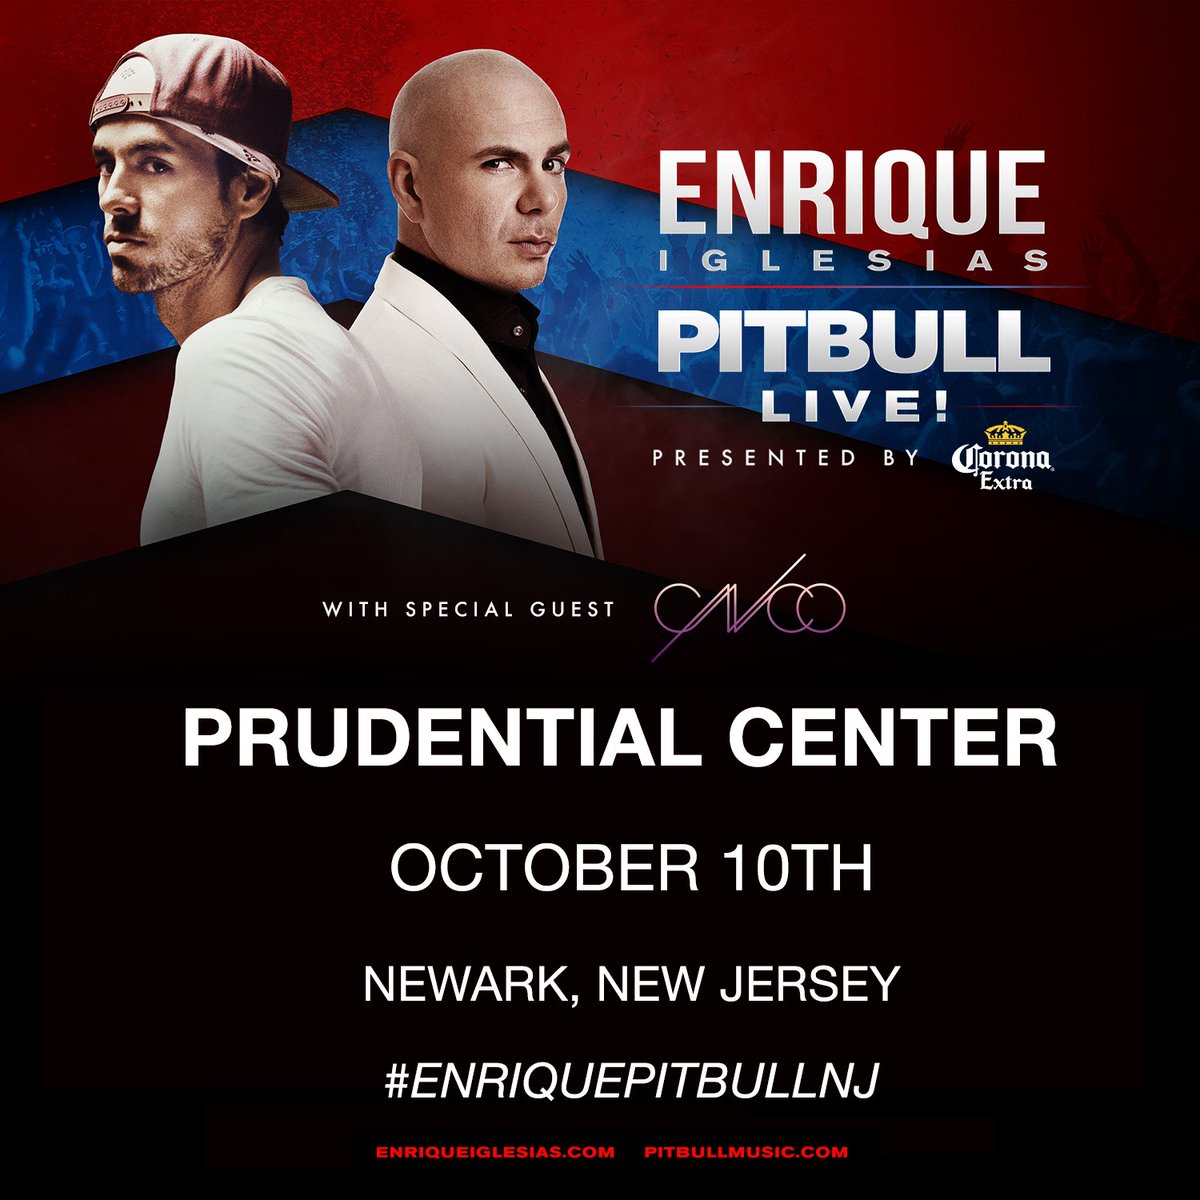 Share with https://t.co/X6n6Lpc8F8 and you could win a pair of tickets to Prudential Center on Oct. 10th. https://t.co/eP11NrkWCV